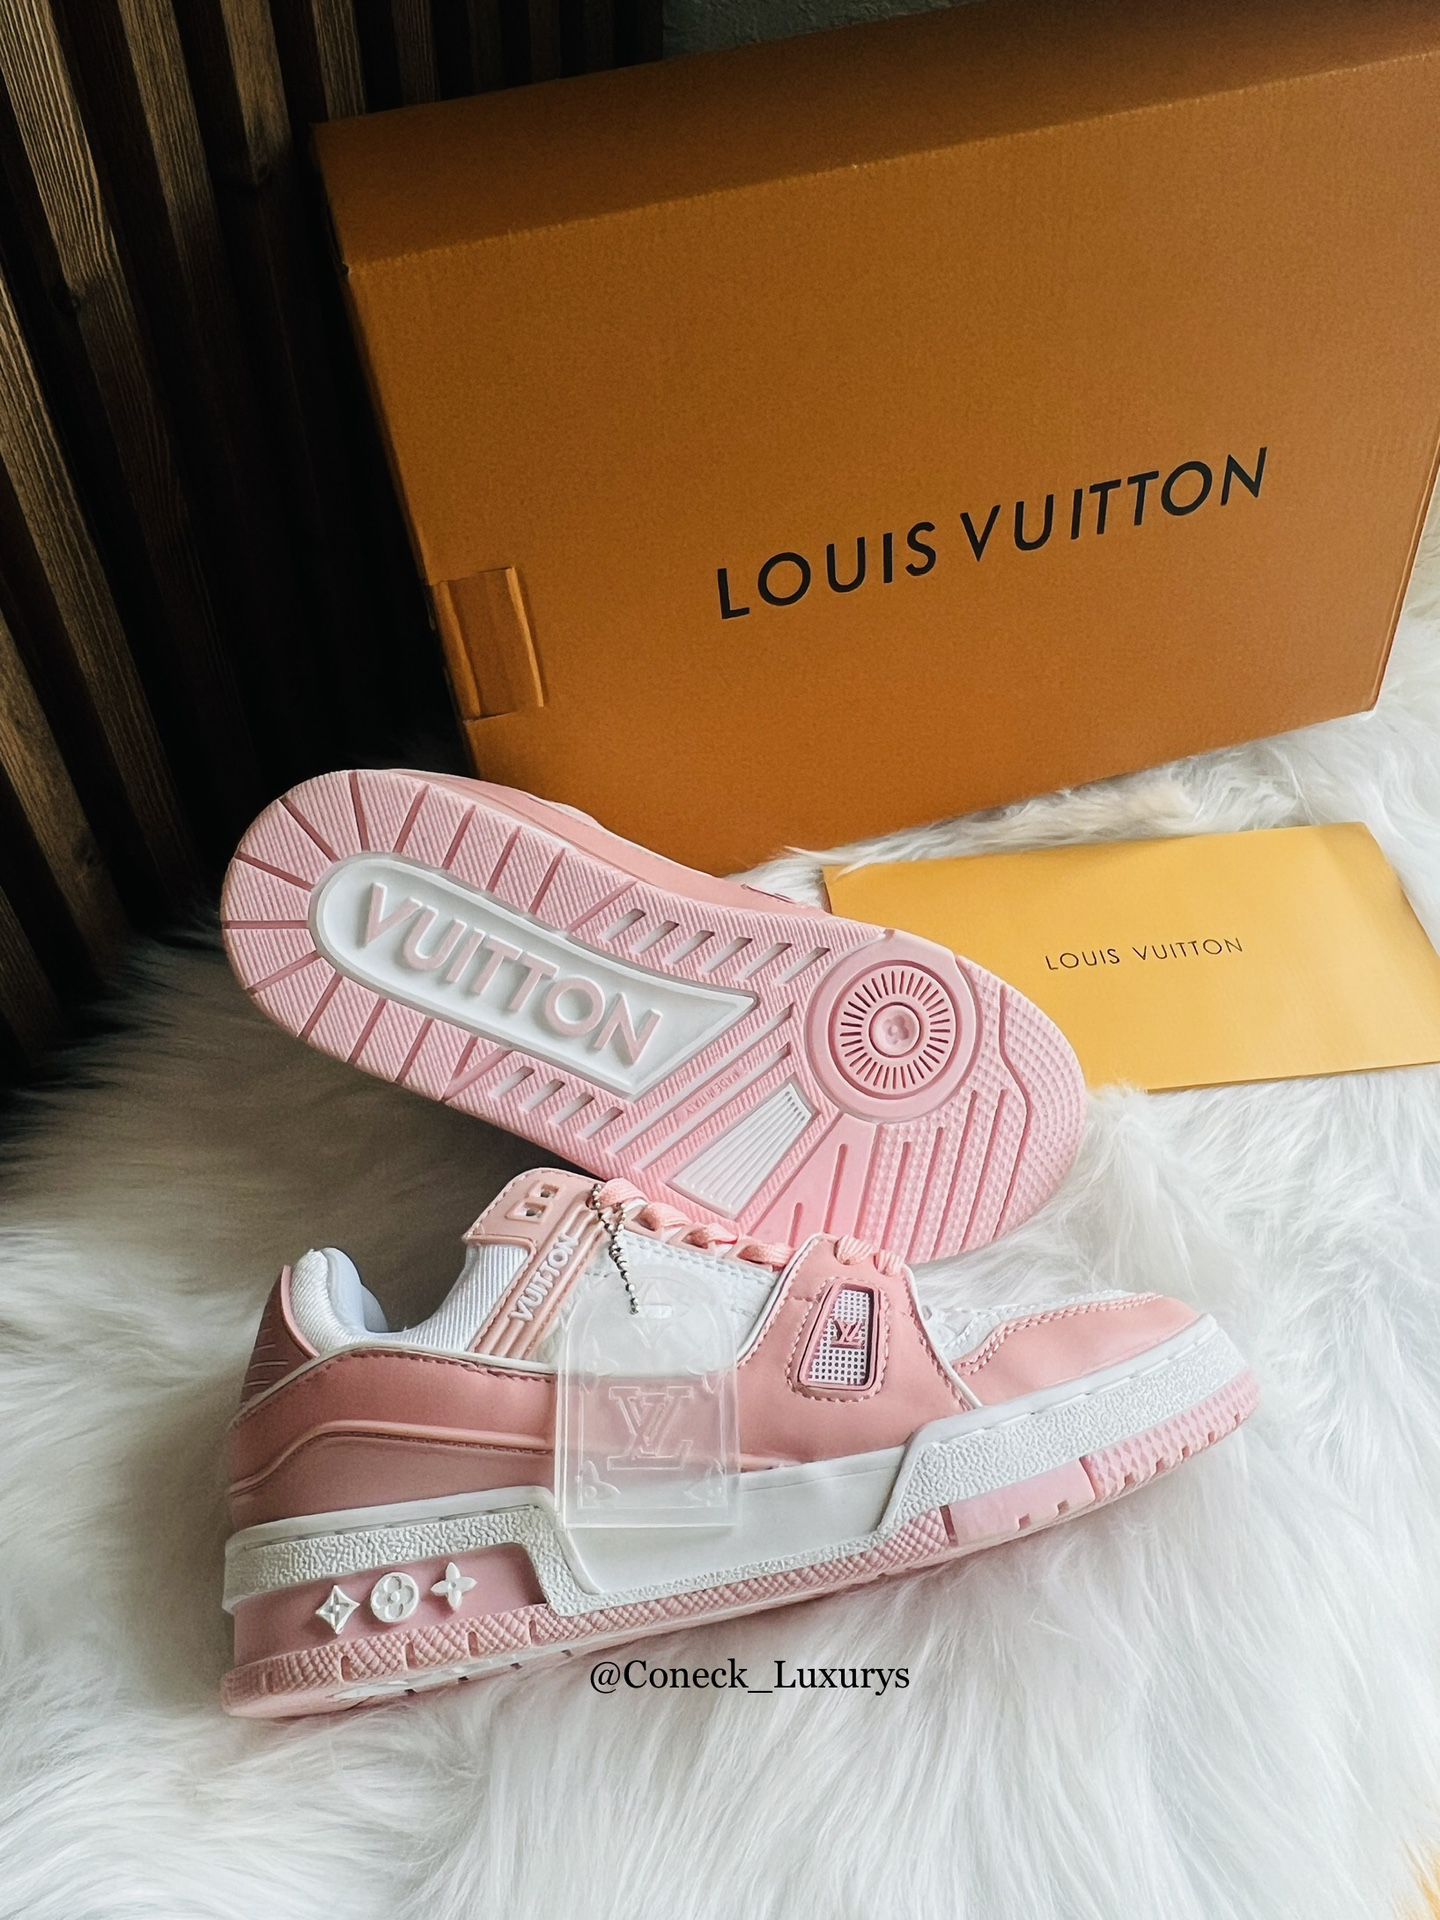 Louis Vuitton Women’s Shoes (pink) for Sale in Medley, FL - OfferUp